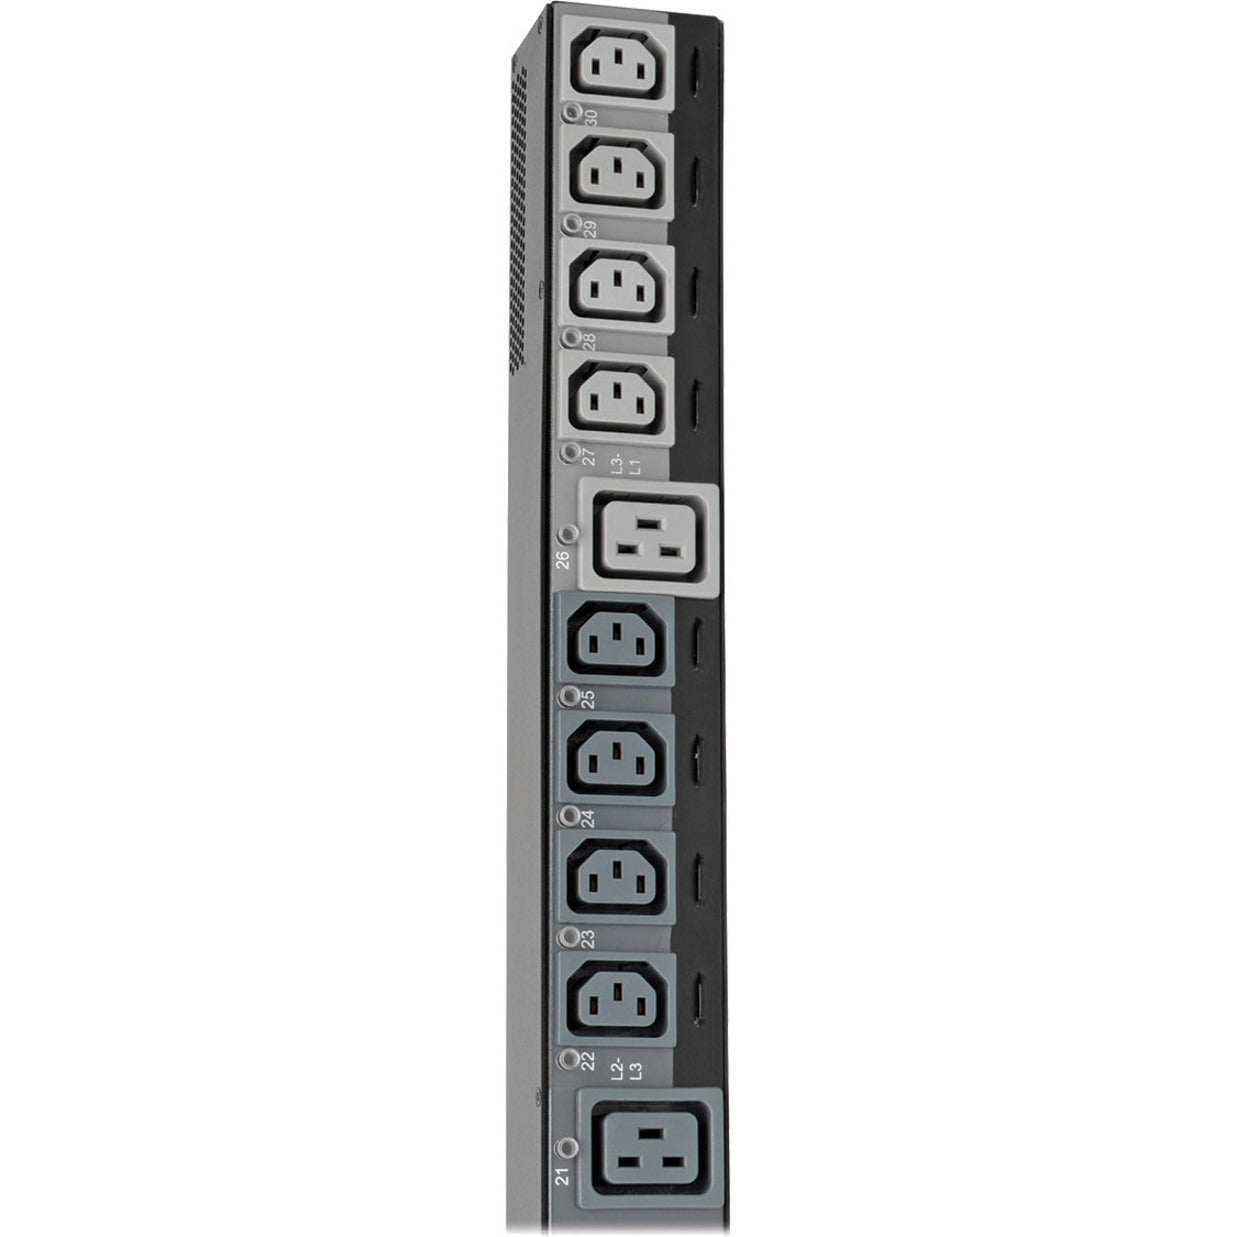 Tripp Lite PDU3EVSR6L2130 30-Outlet PDU 10 kW Power Rating Three Phase Switched Overload Protection 